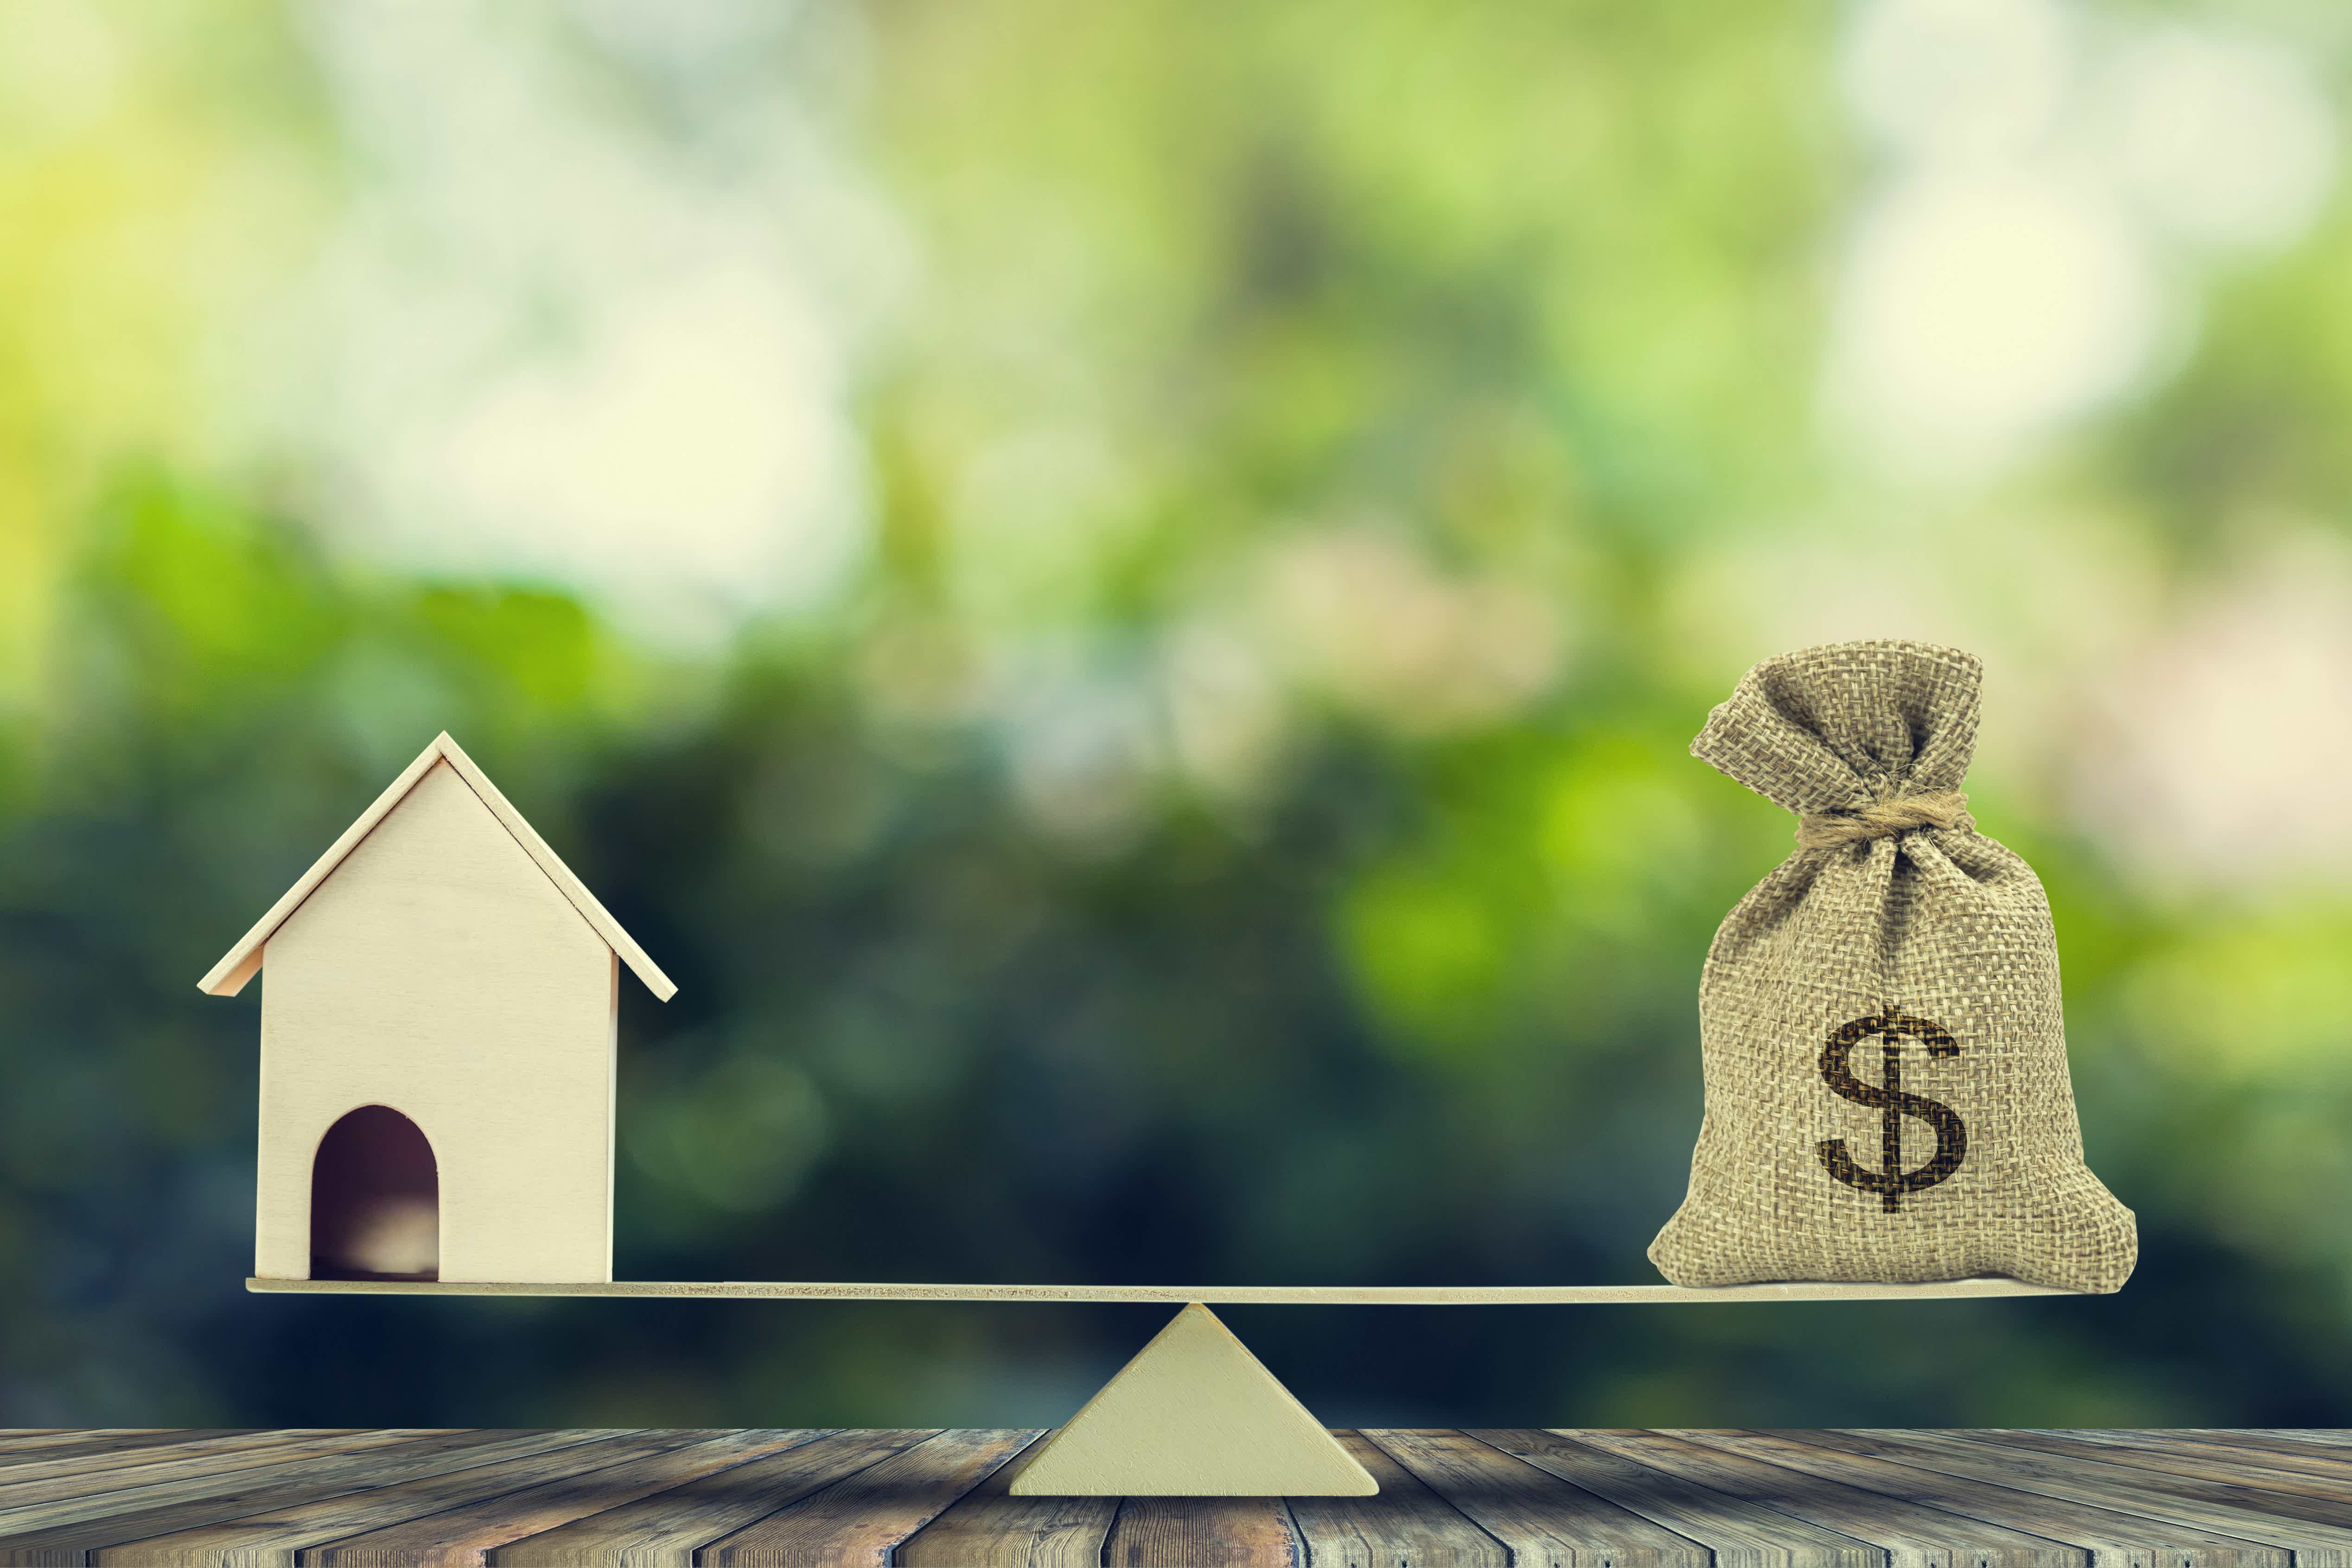 Most people will need a mortgage loan to buy a house. Source: Adobe Stock.